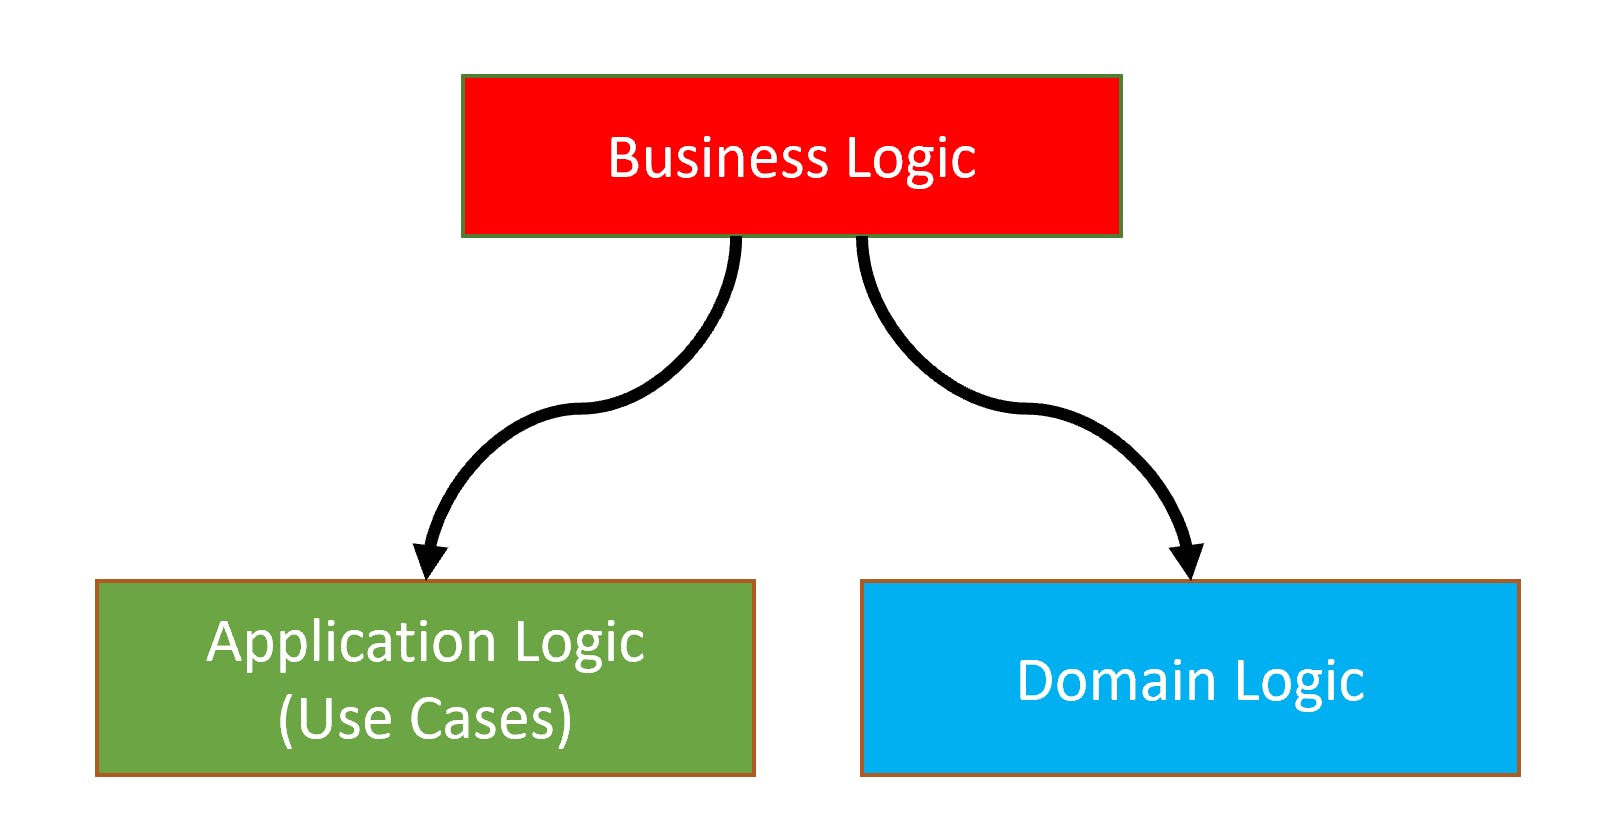 Database vs. Application Layer: Where Should Your Business Logic Reside?